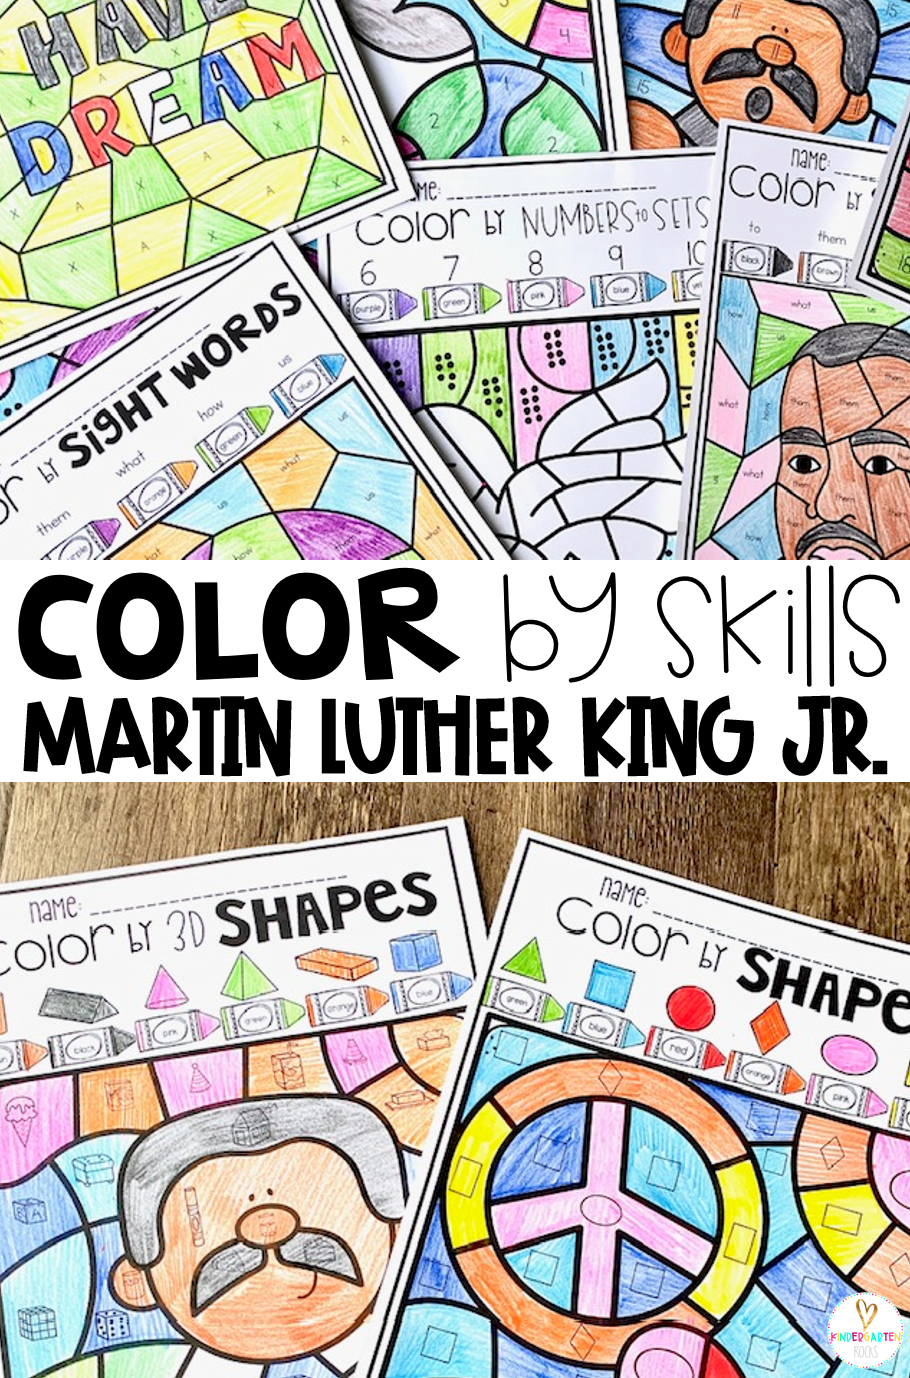 Martin Luther King Jr. Activities Color by Skills are a fun and engaging way to practice a variety of skills in your literacy and math centers.